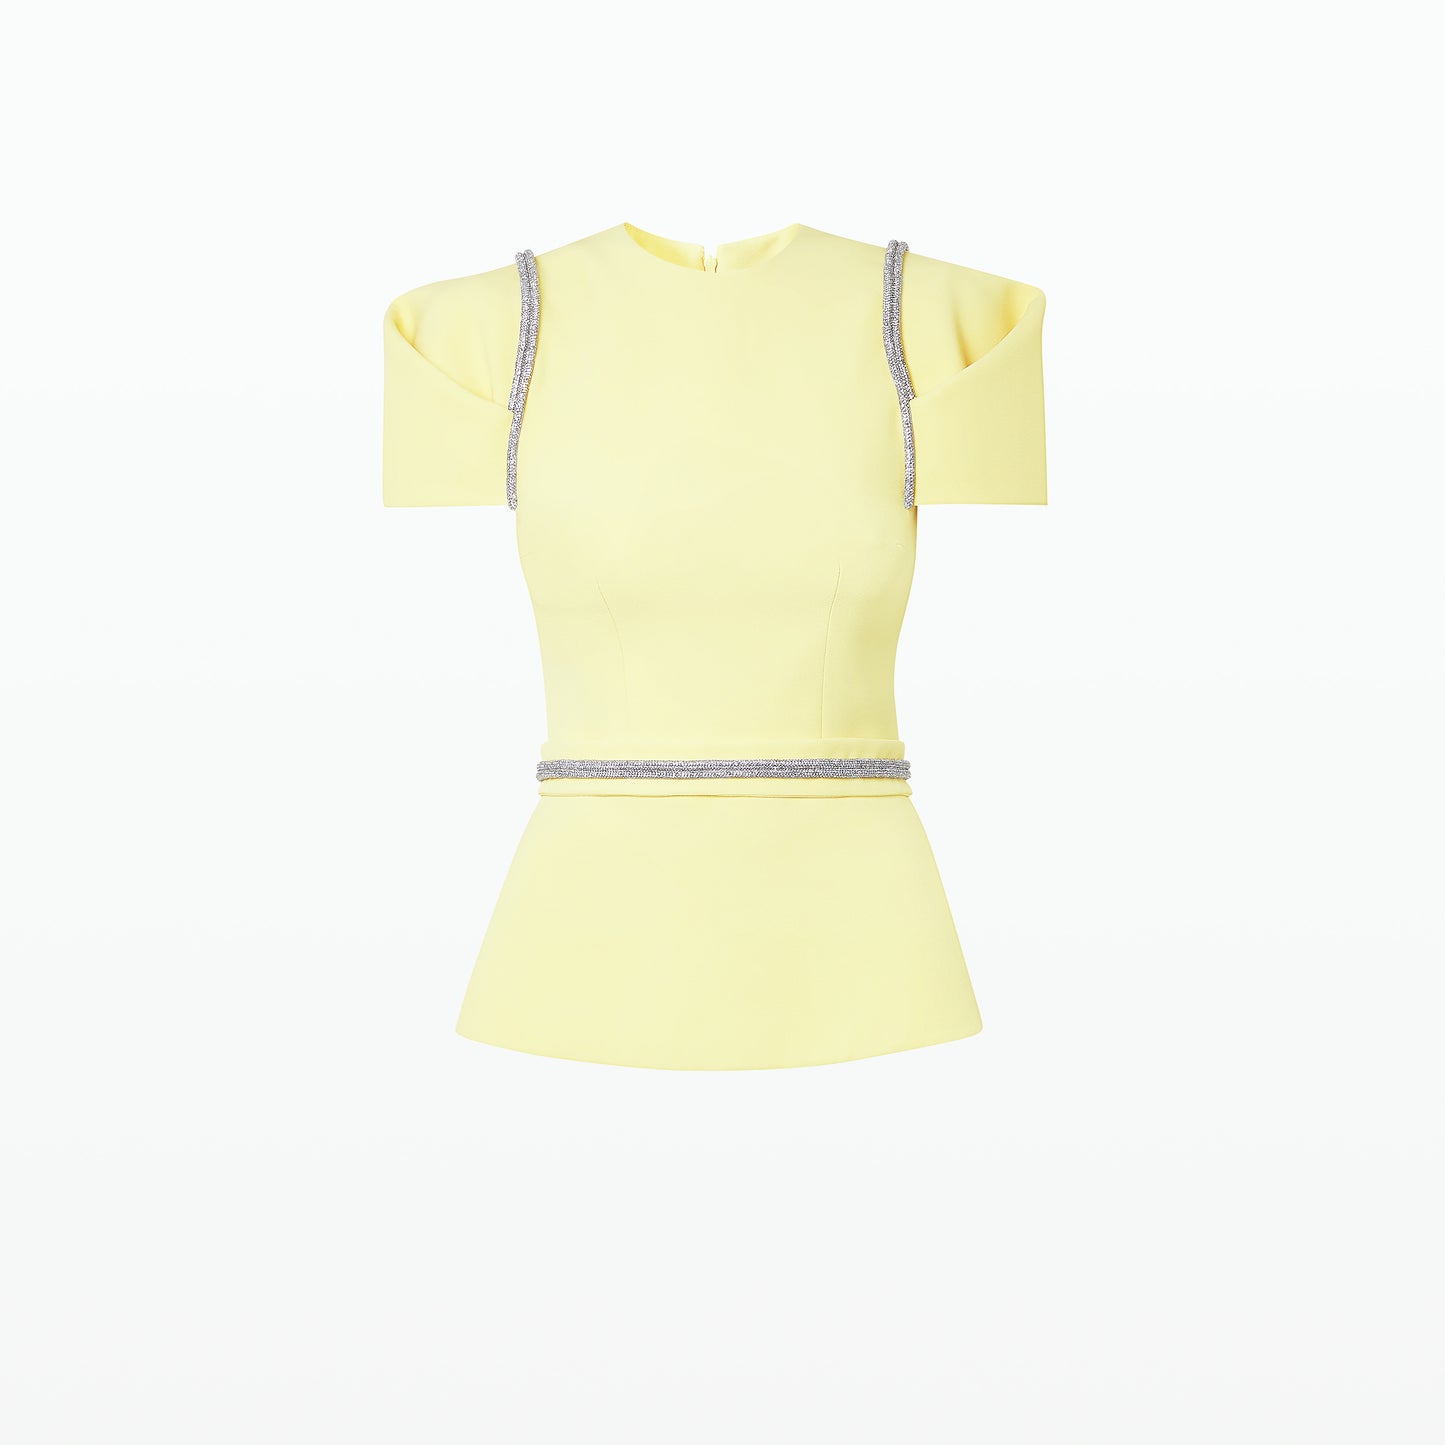 Halo Pale Yellow Top